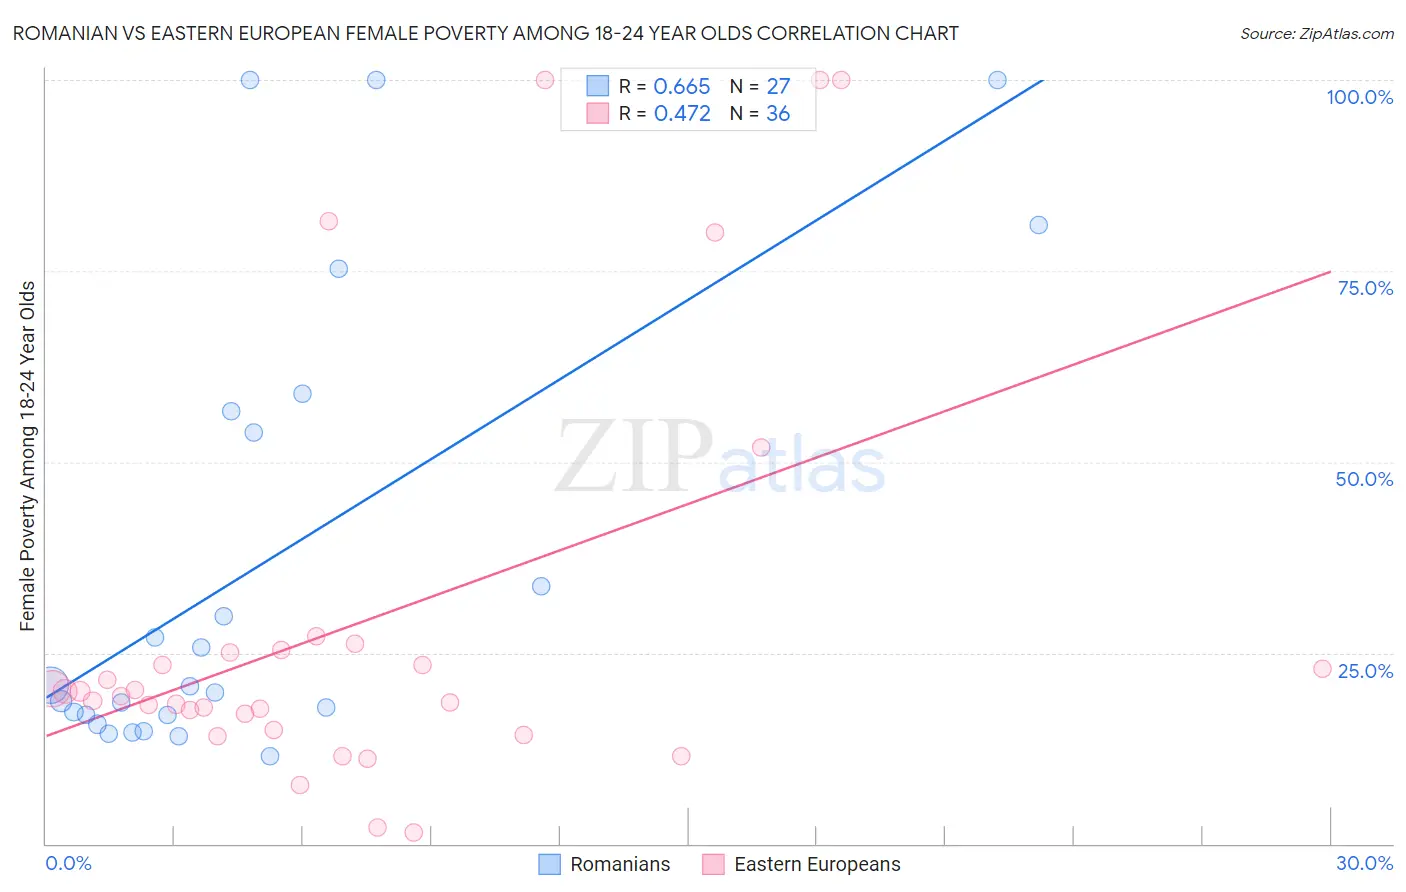 Romanian vs Eastern European Female Poverty Among 18-24 Year Olds